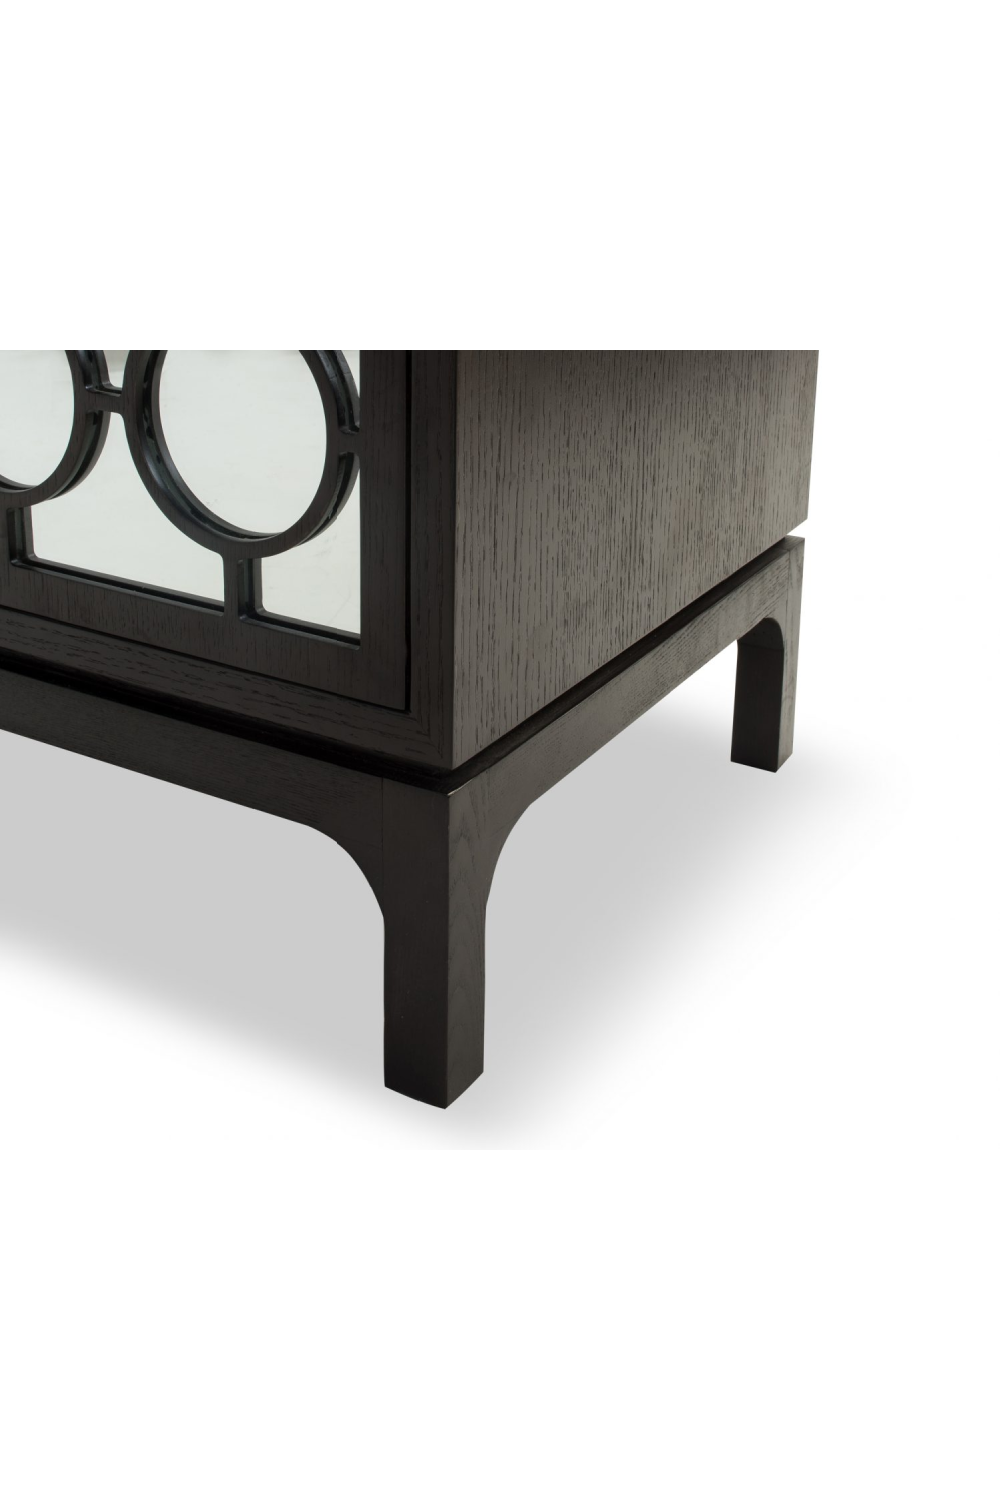 Mirrored Panel Bedside Table | Liang & Eimil Marriott | OROA.com